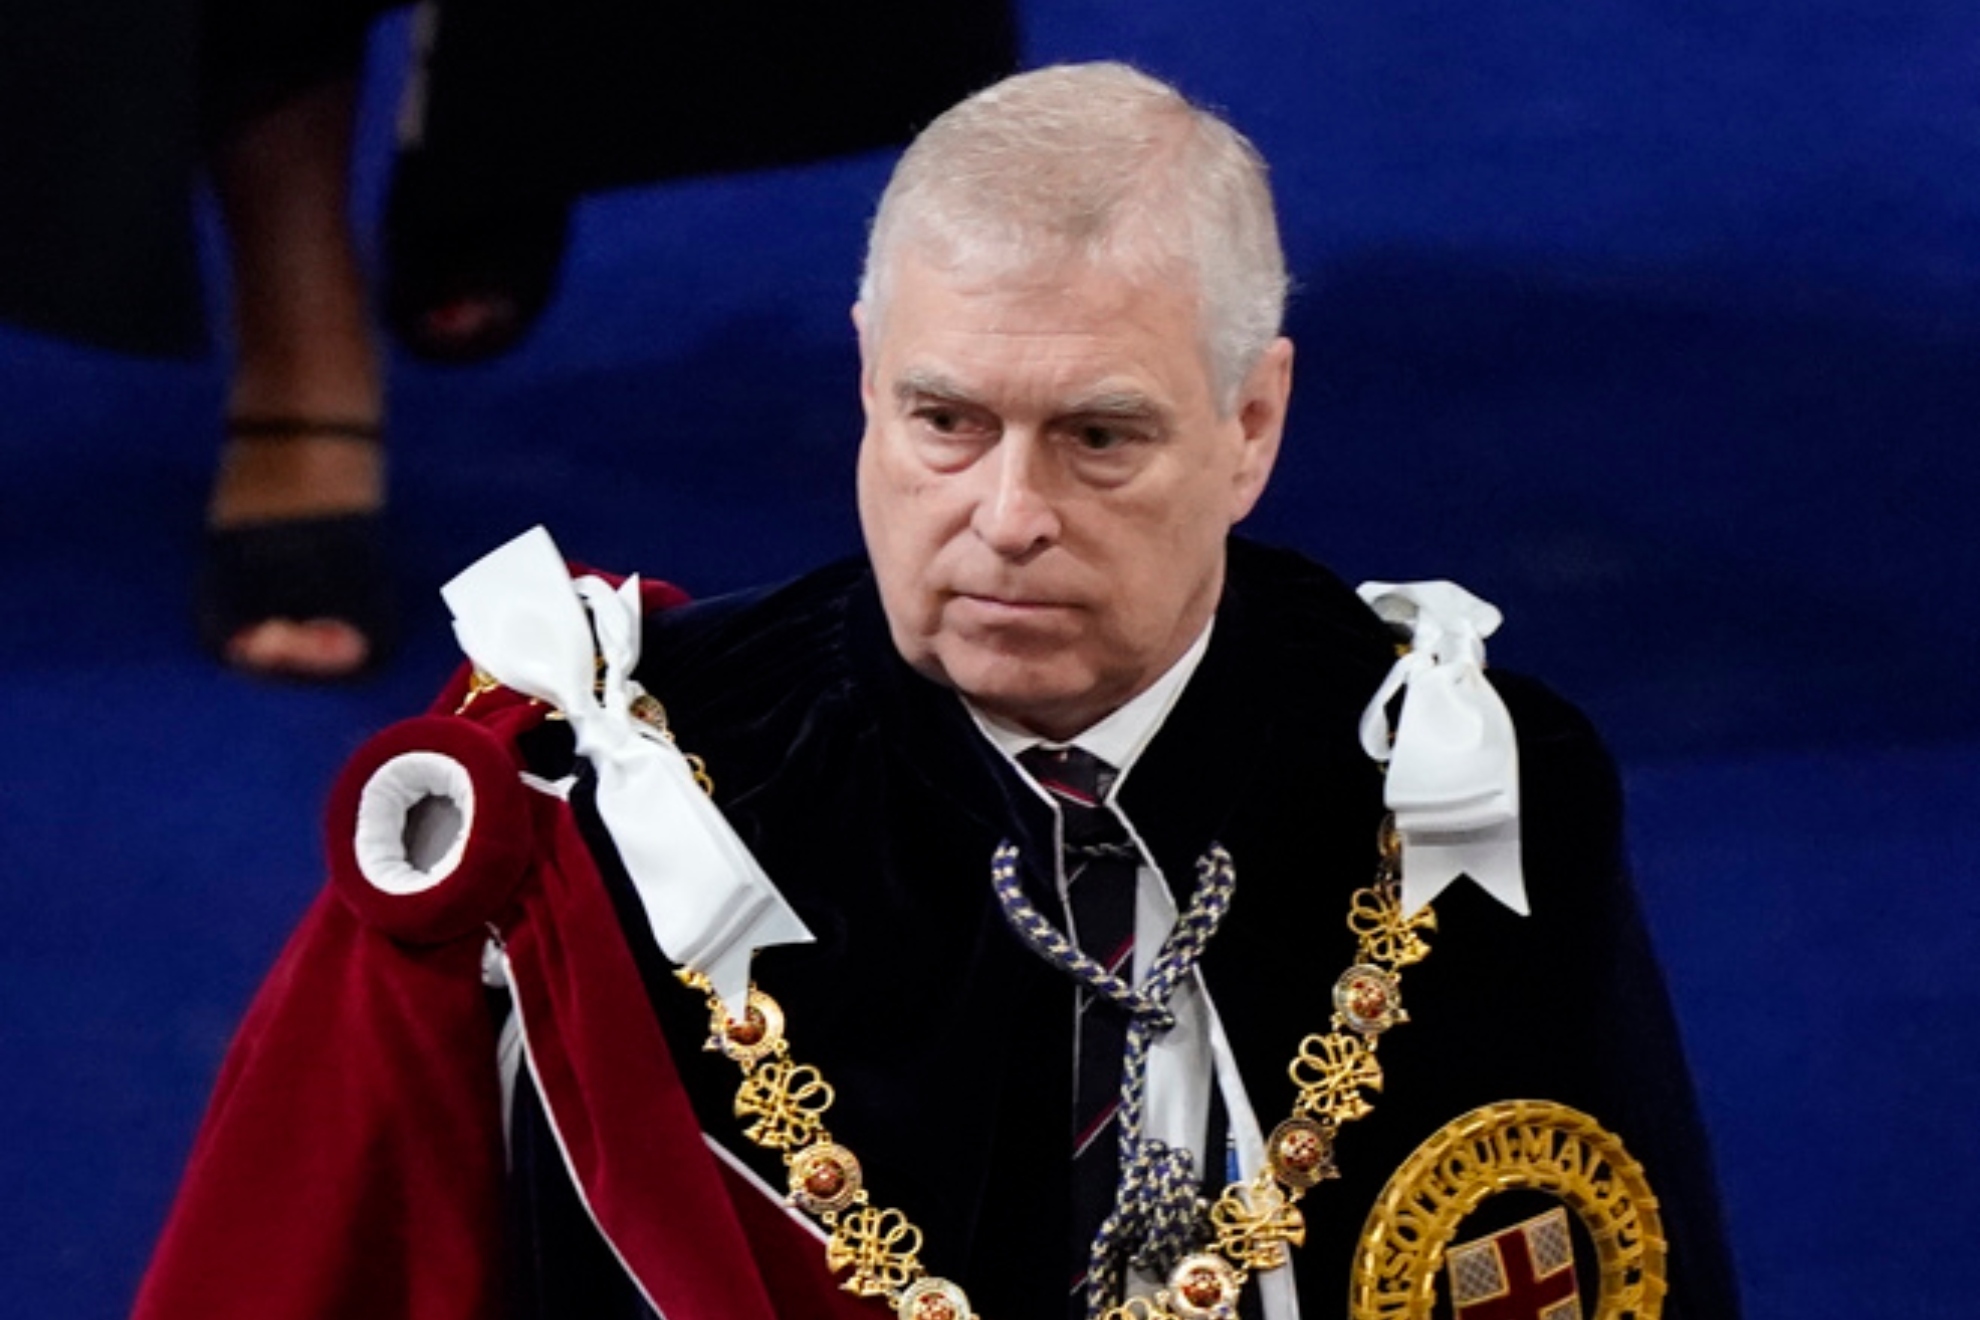 Prince Andrew will do a stand-in at his home to prevent getting evicted while its being remodeled